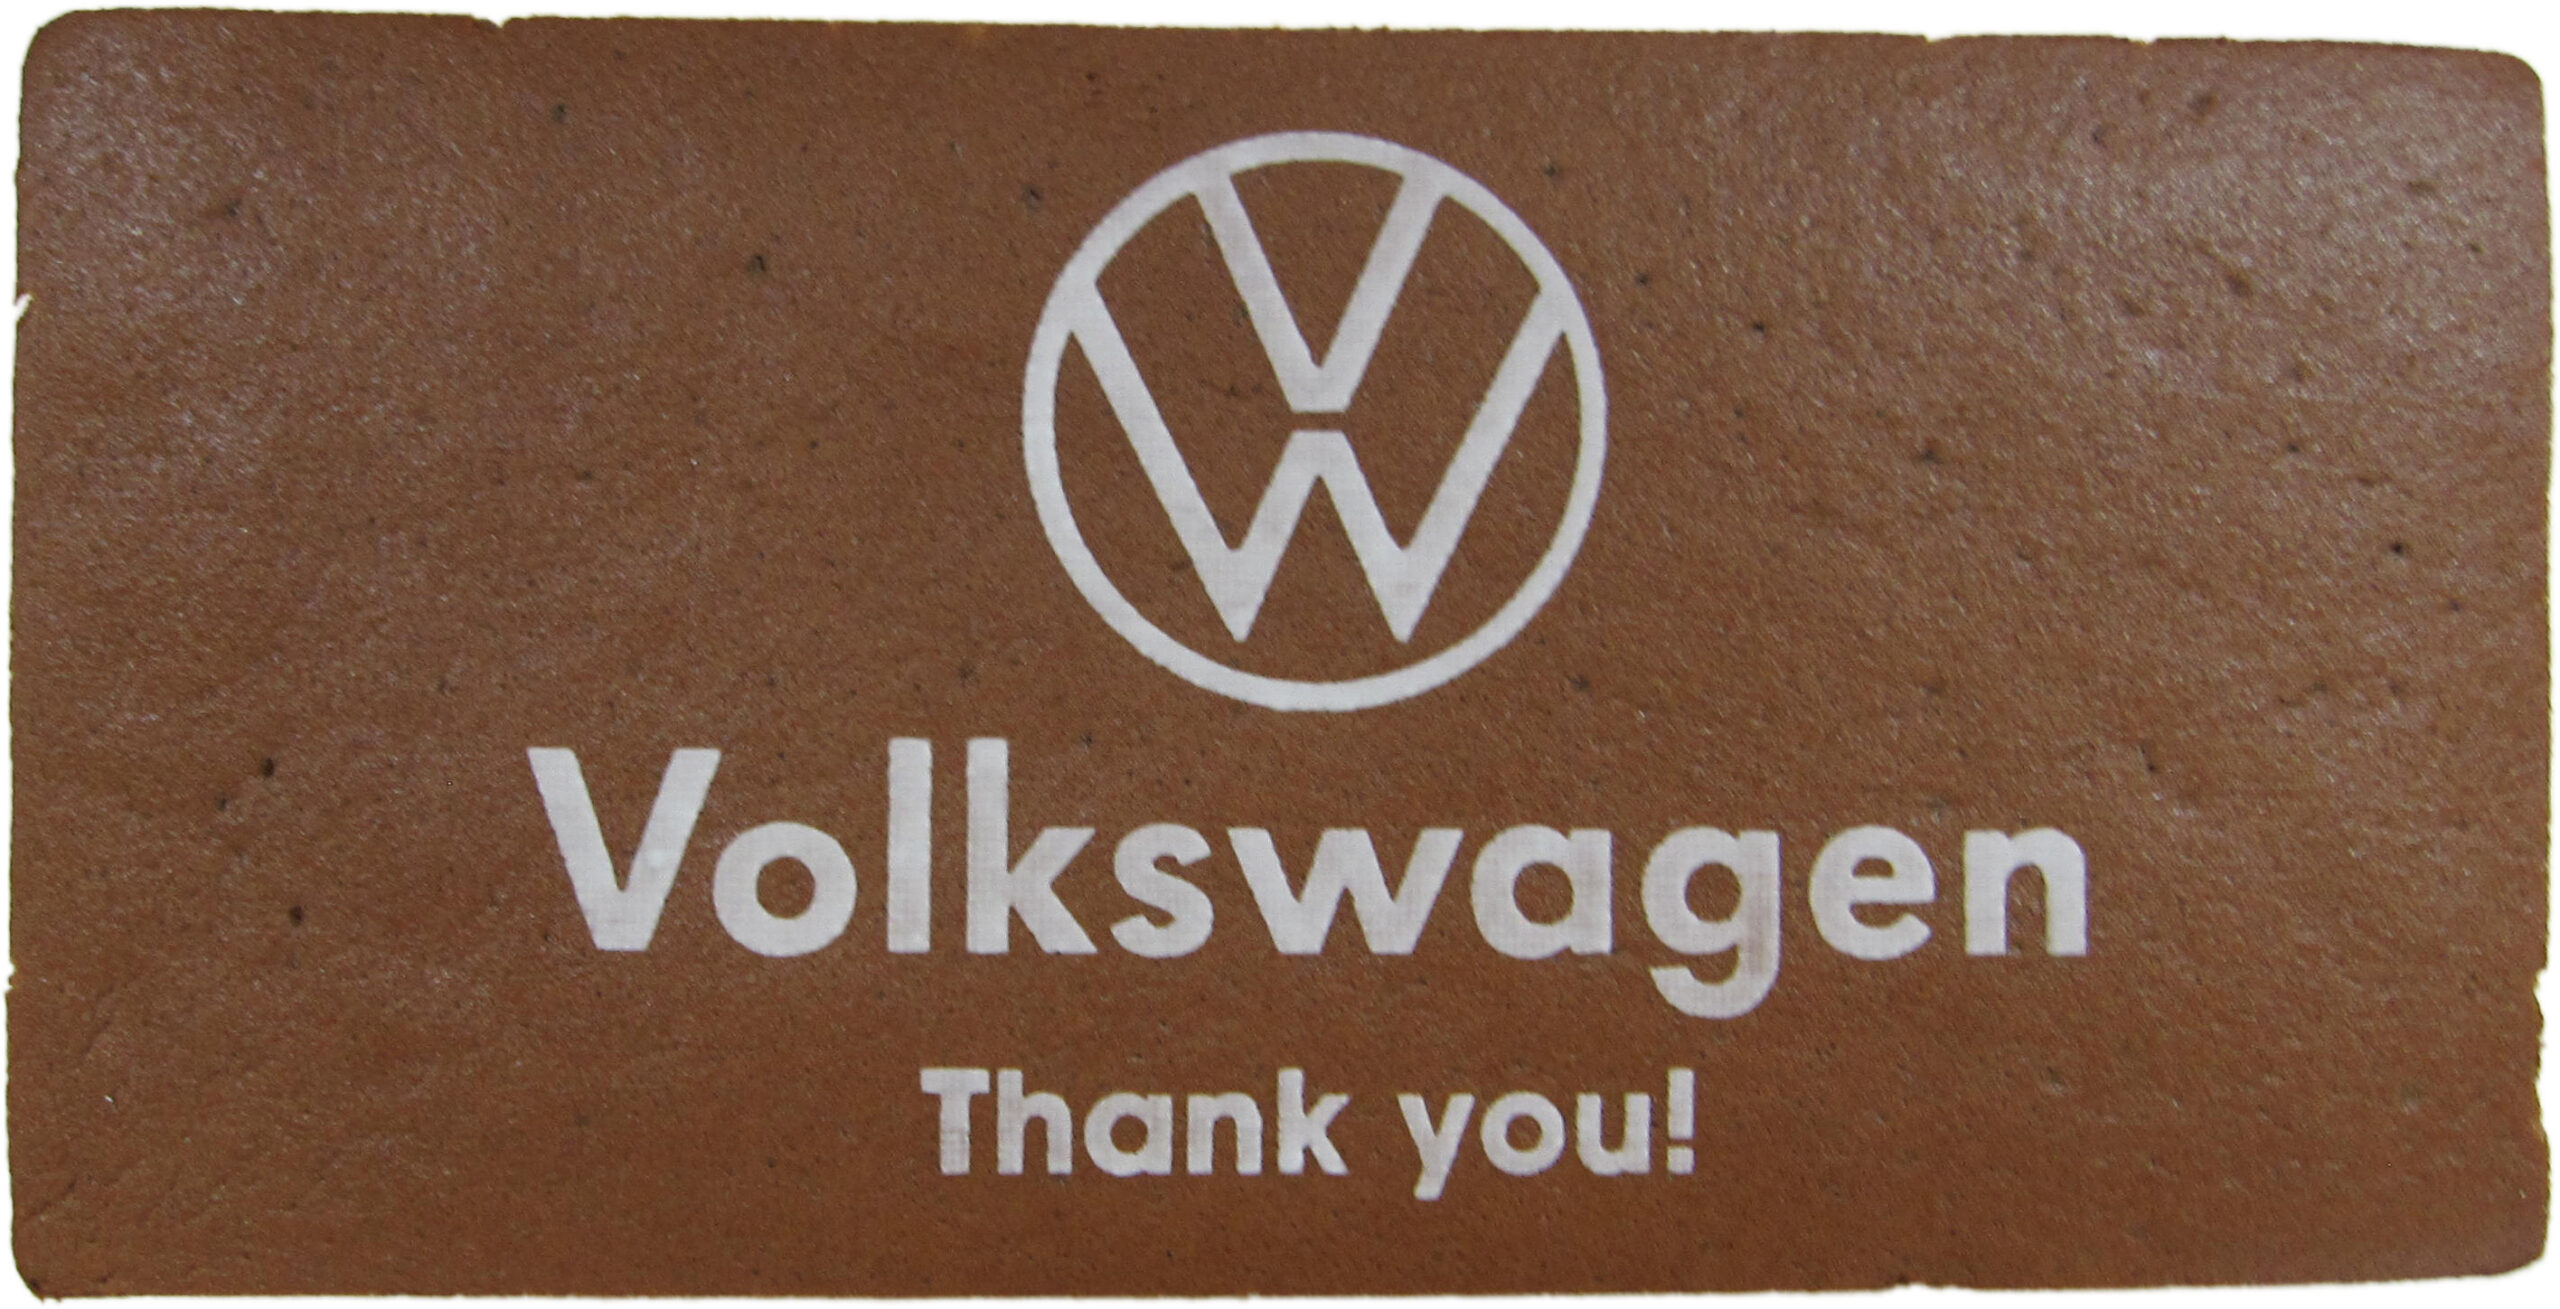 Volkswagen様　Thank you!